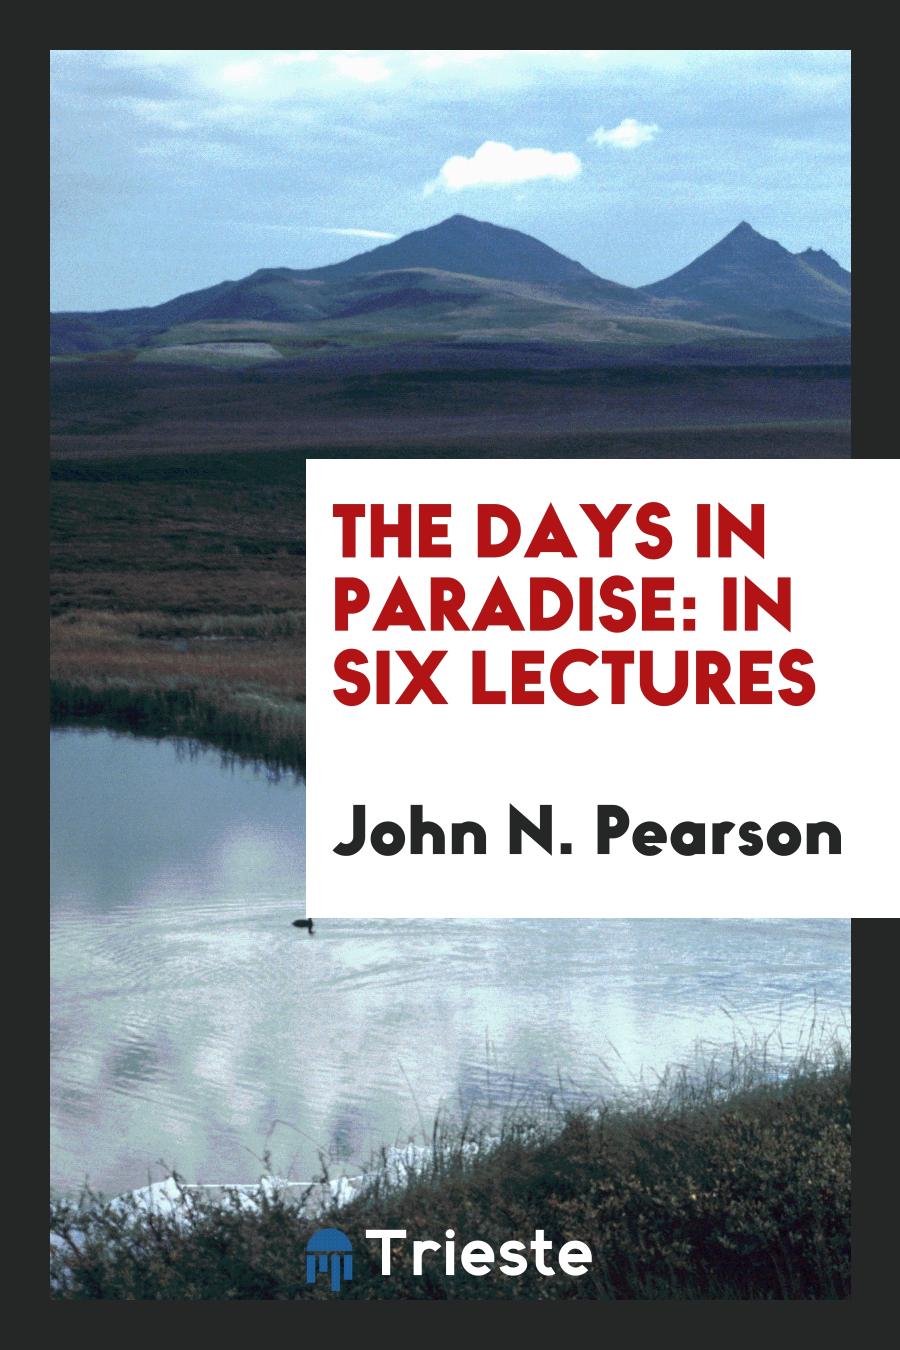 The Days in Paradise: In Six Lectures